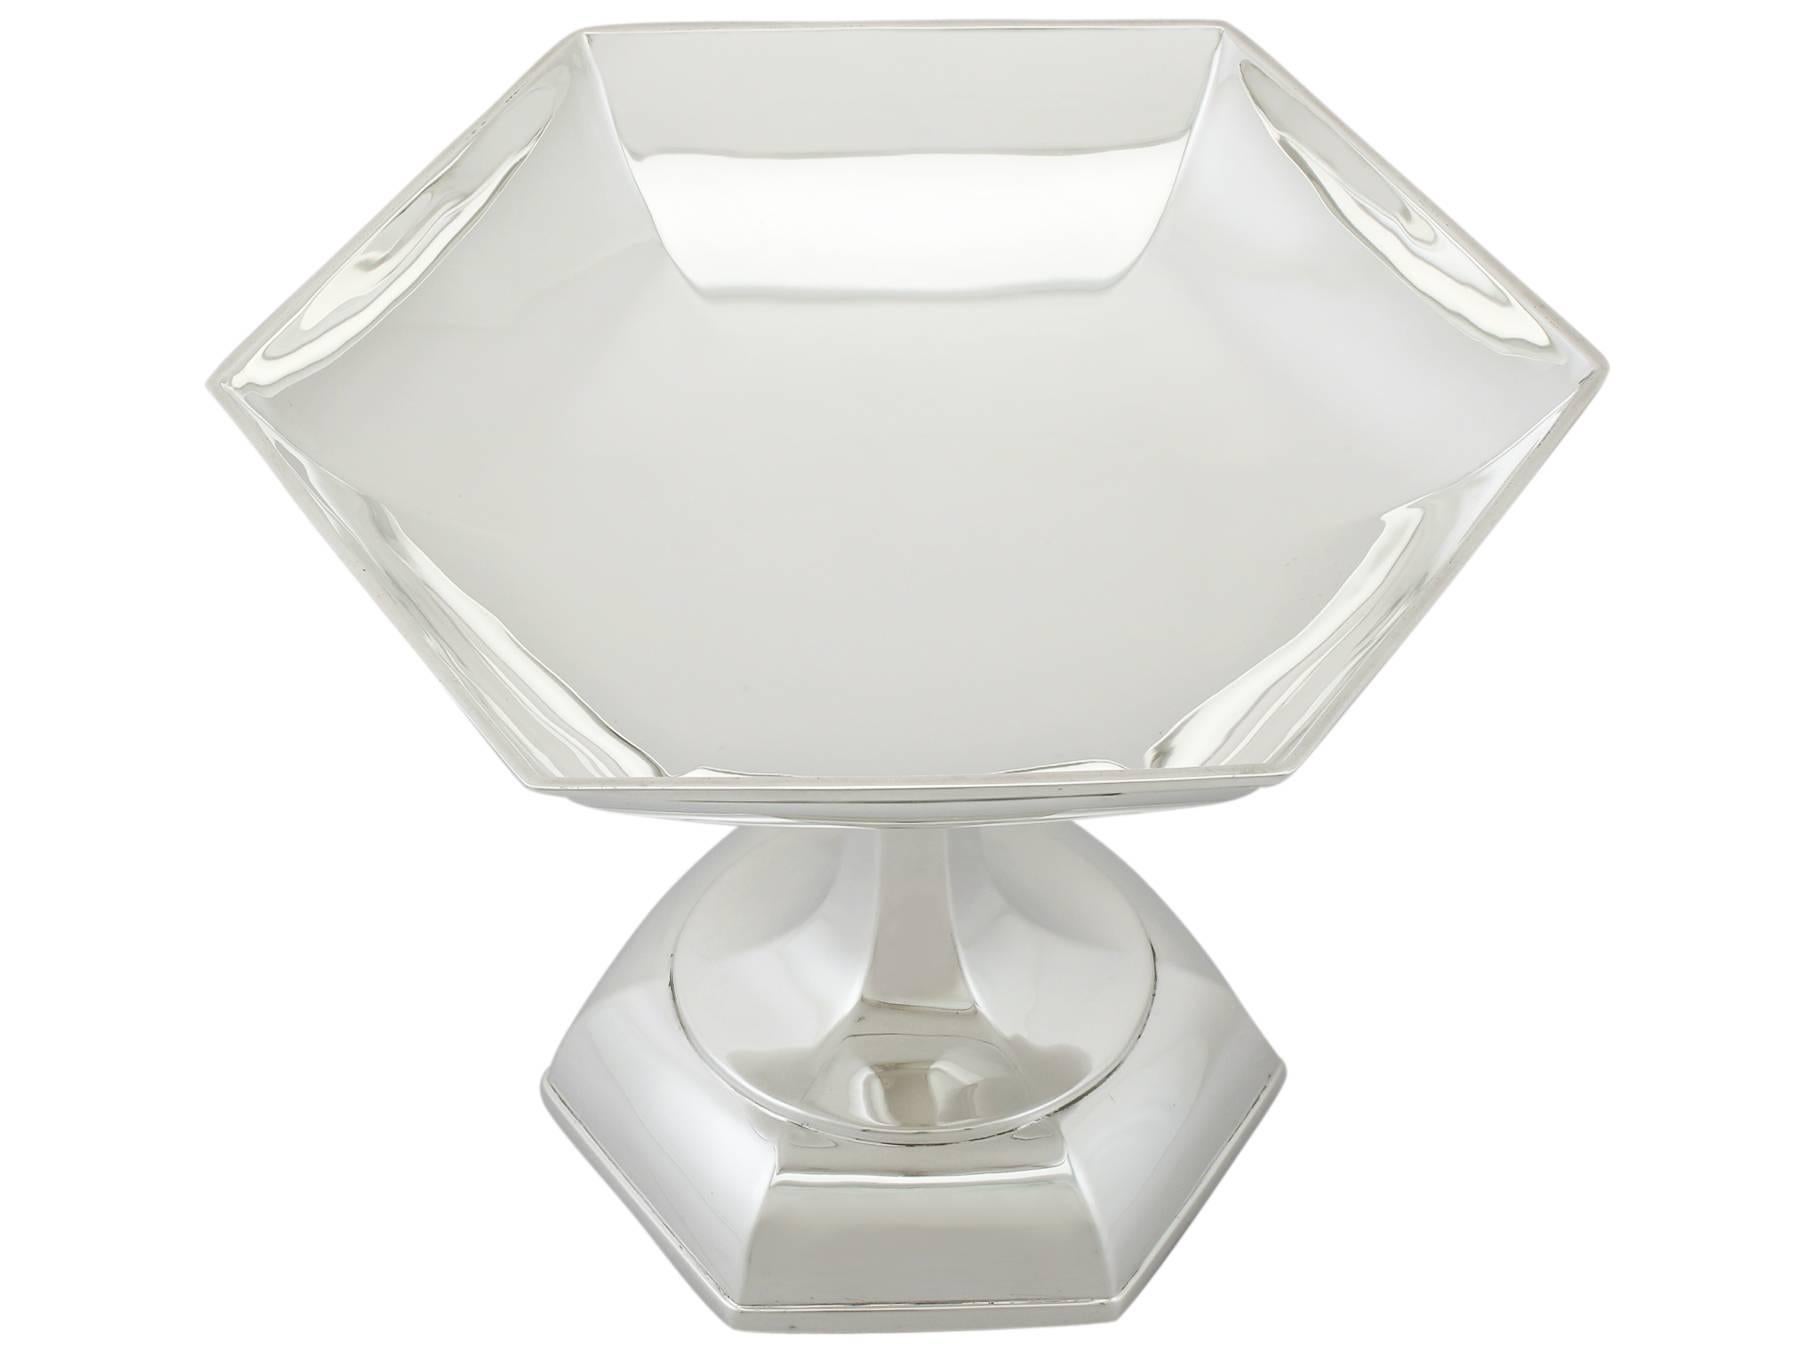 An exceptional, fine and impressive antique George V English sterling silver tazza (pedestalled dish) by Walker and Hall in the Art Deco style; an addition to our Art Deco silverware collection.

This exceptional antique George V sterling silver